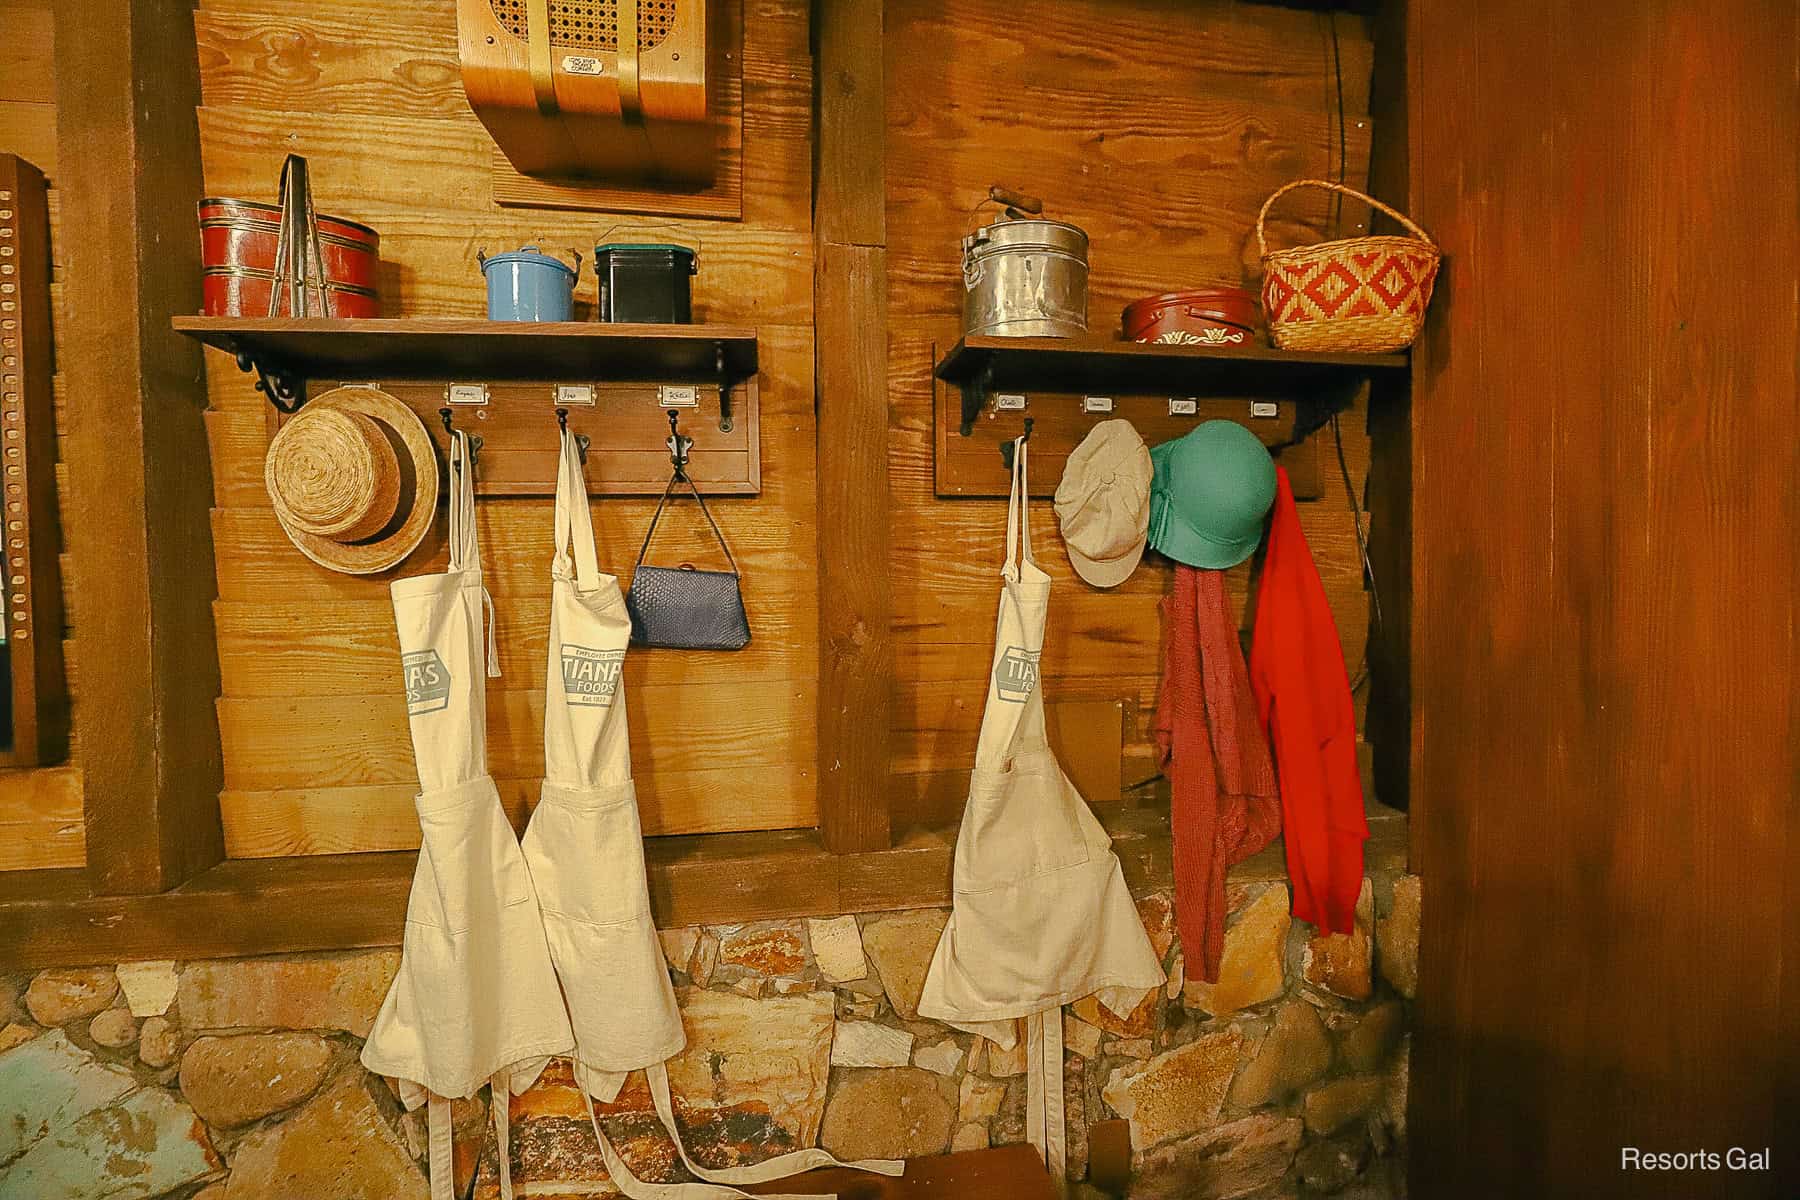 Tiana's Food aprons, hats, and baskets hanging in the queue portion of Tiana's Bayou Adventure 